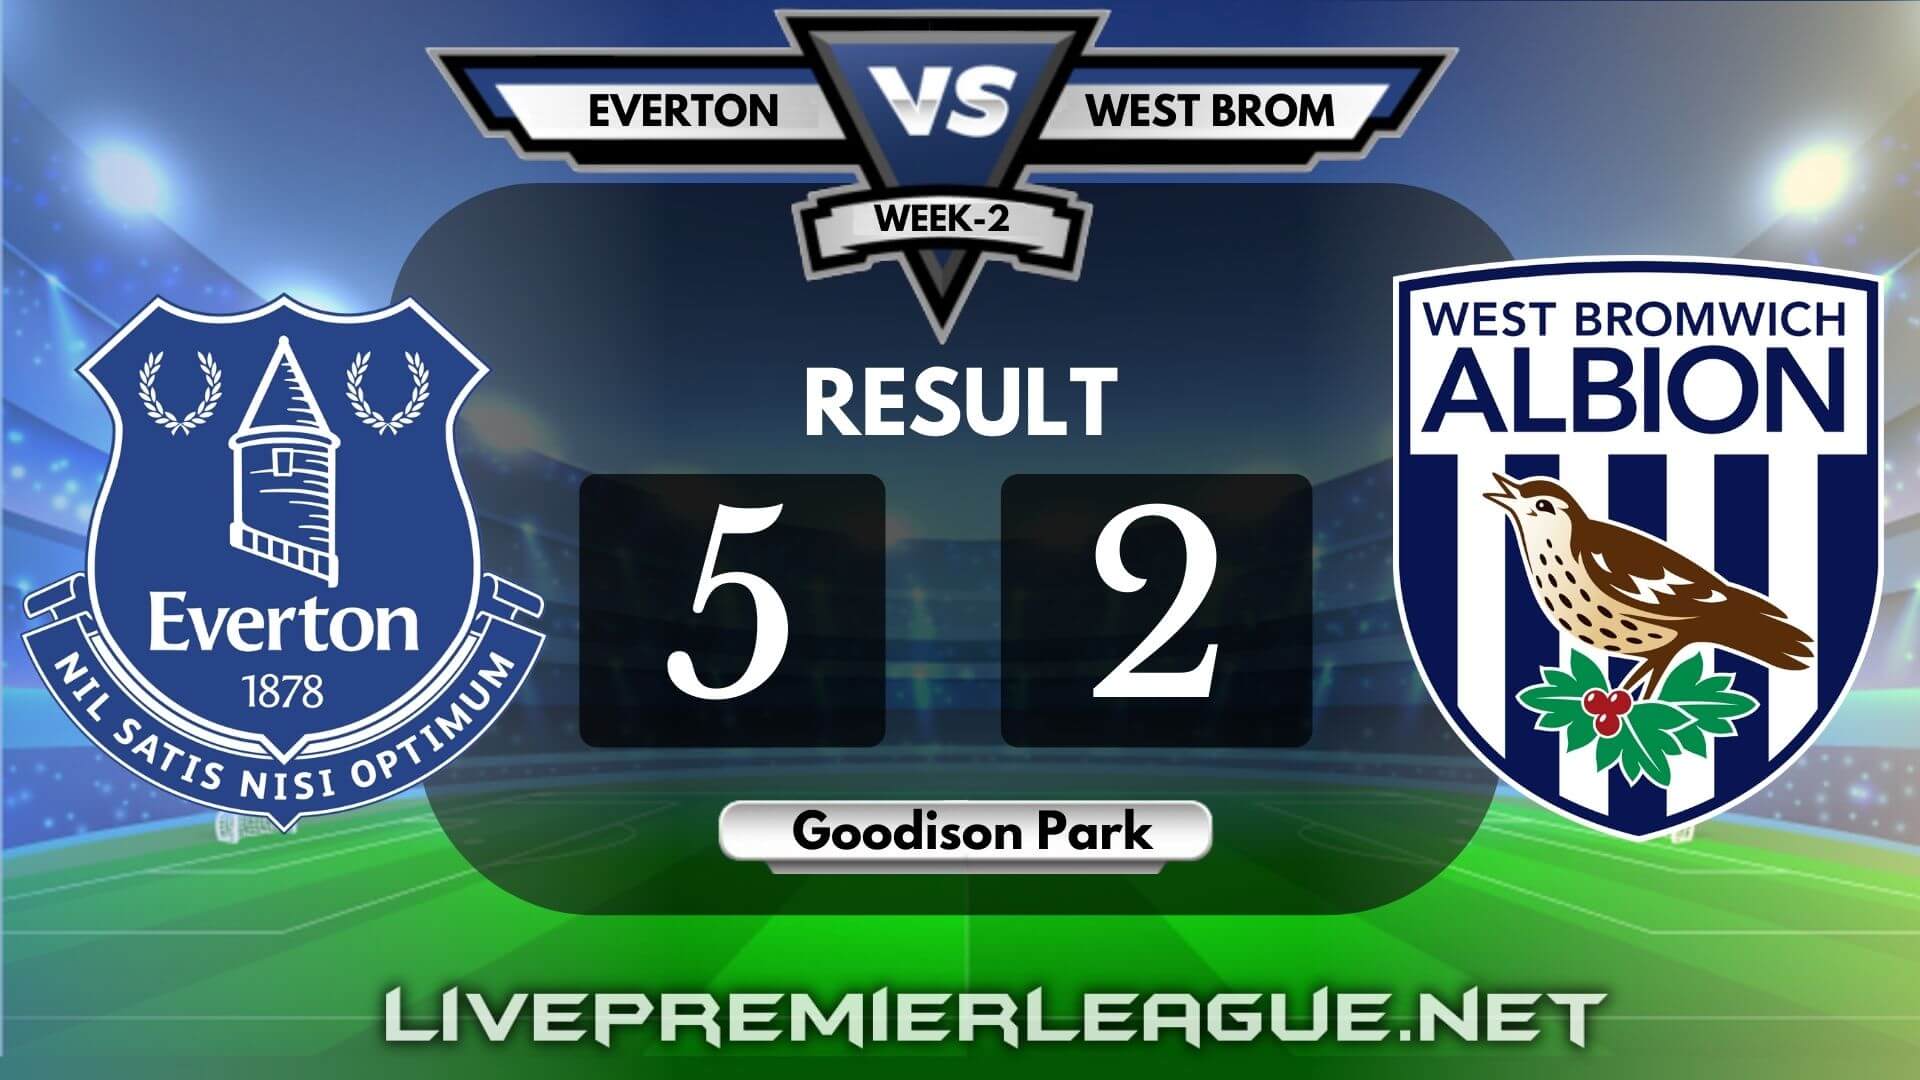 Everton Vs West Bromwich Albion | Week 2 Result 2020